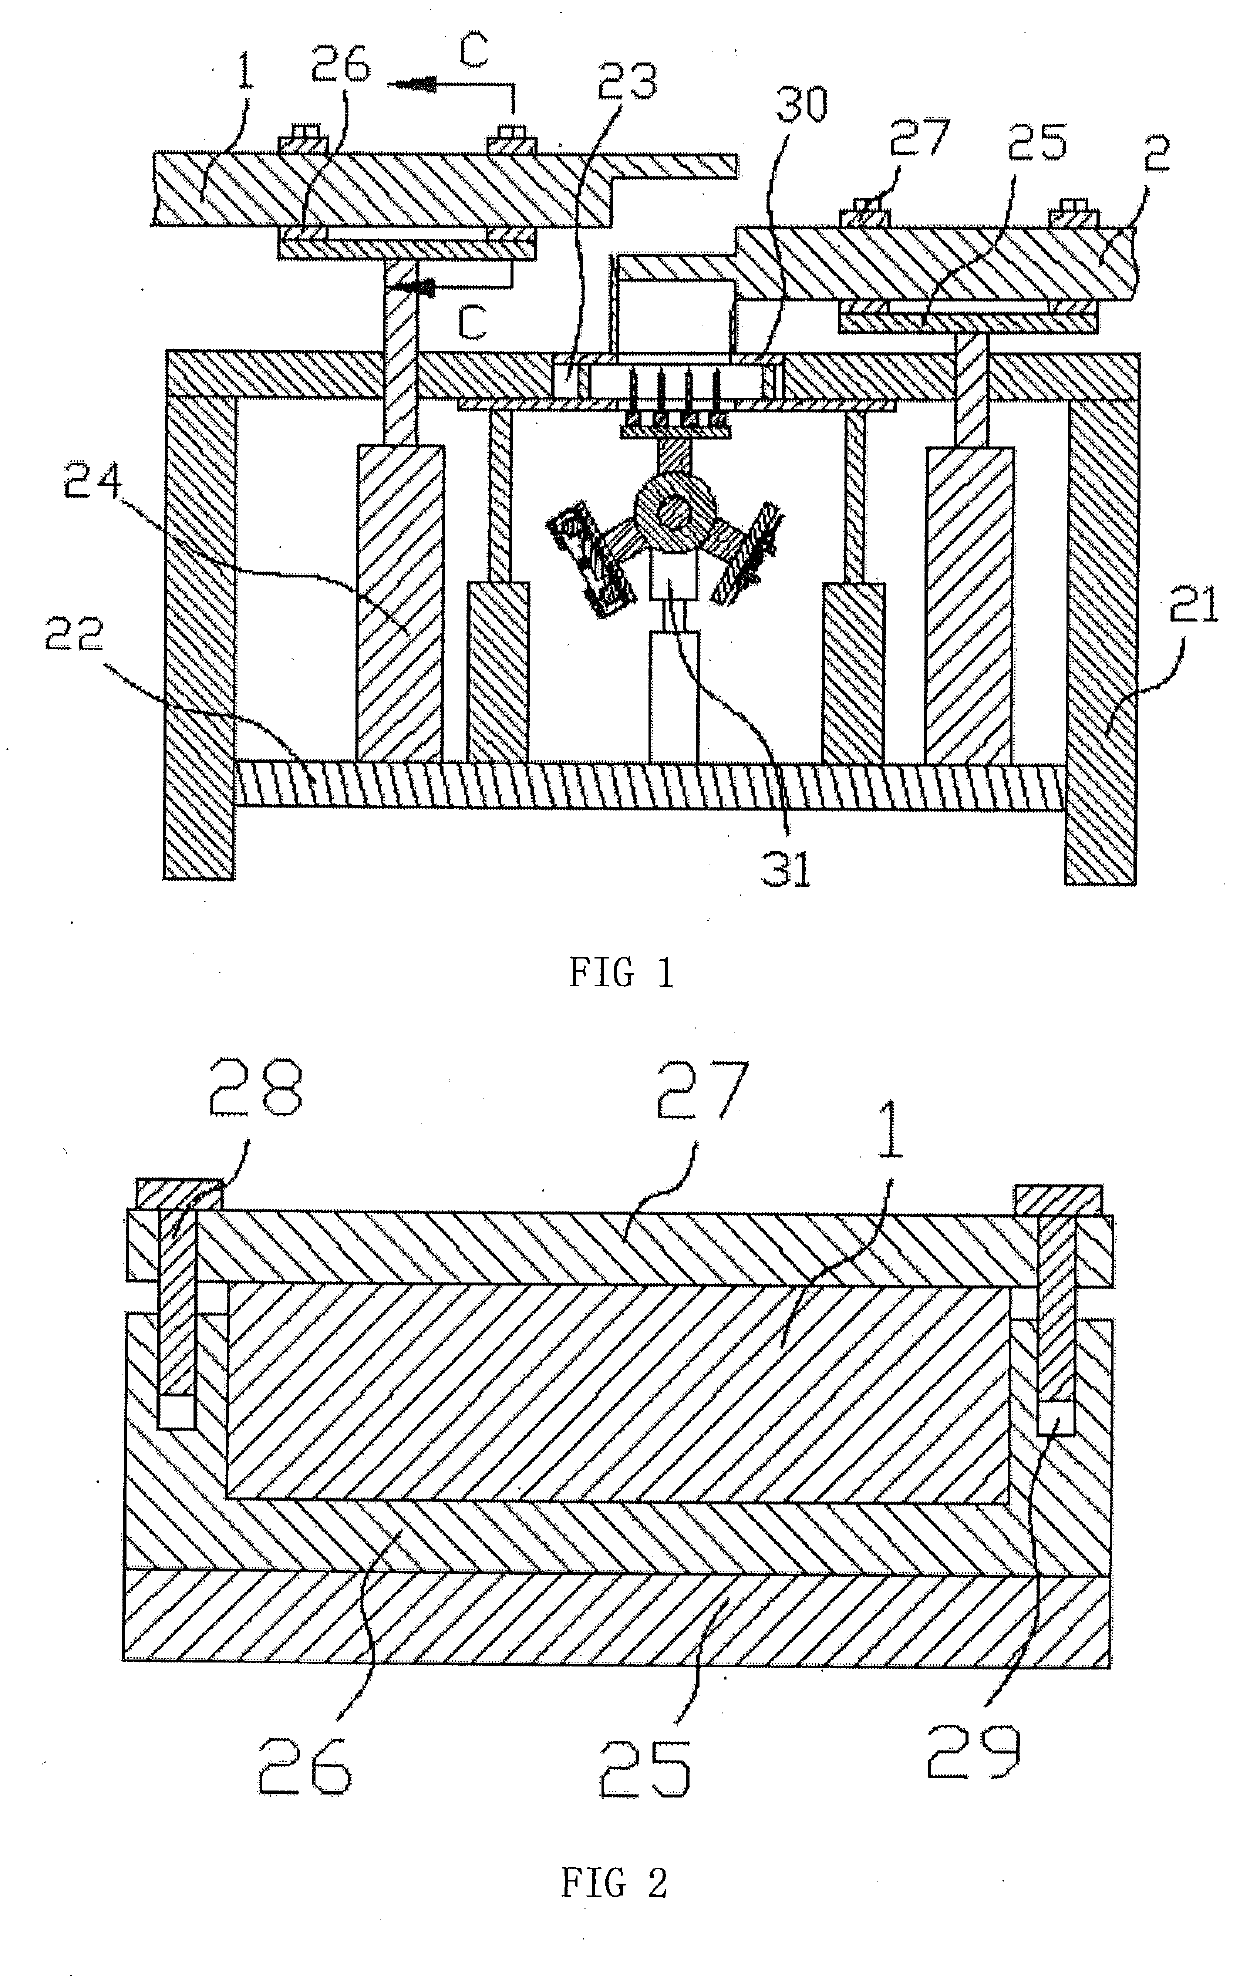 Integrated processing machine for positioning, trimming, and punching ceiling splicing structures